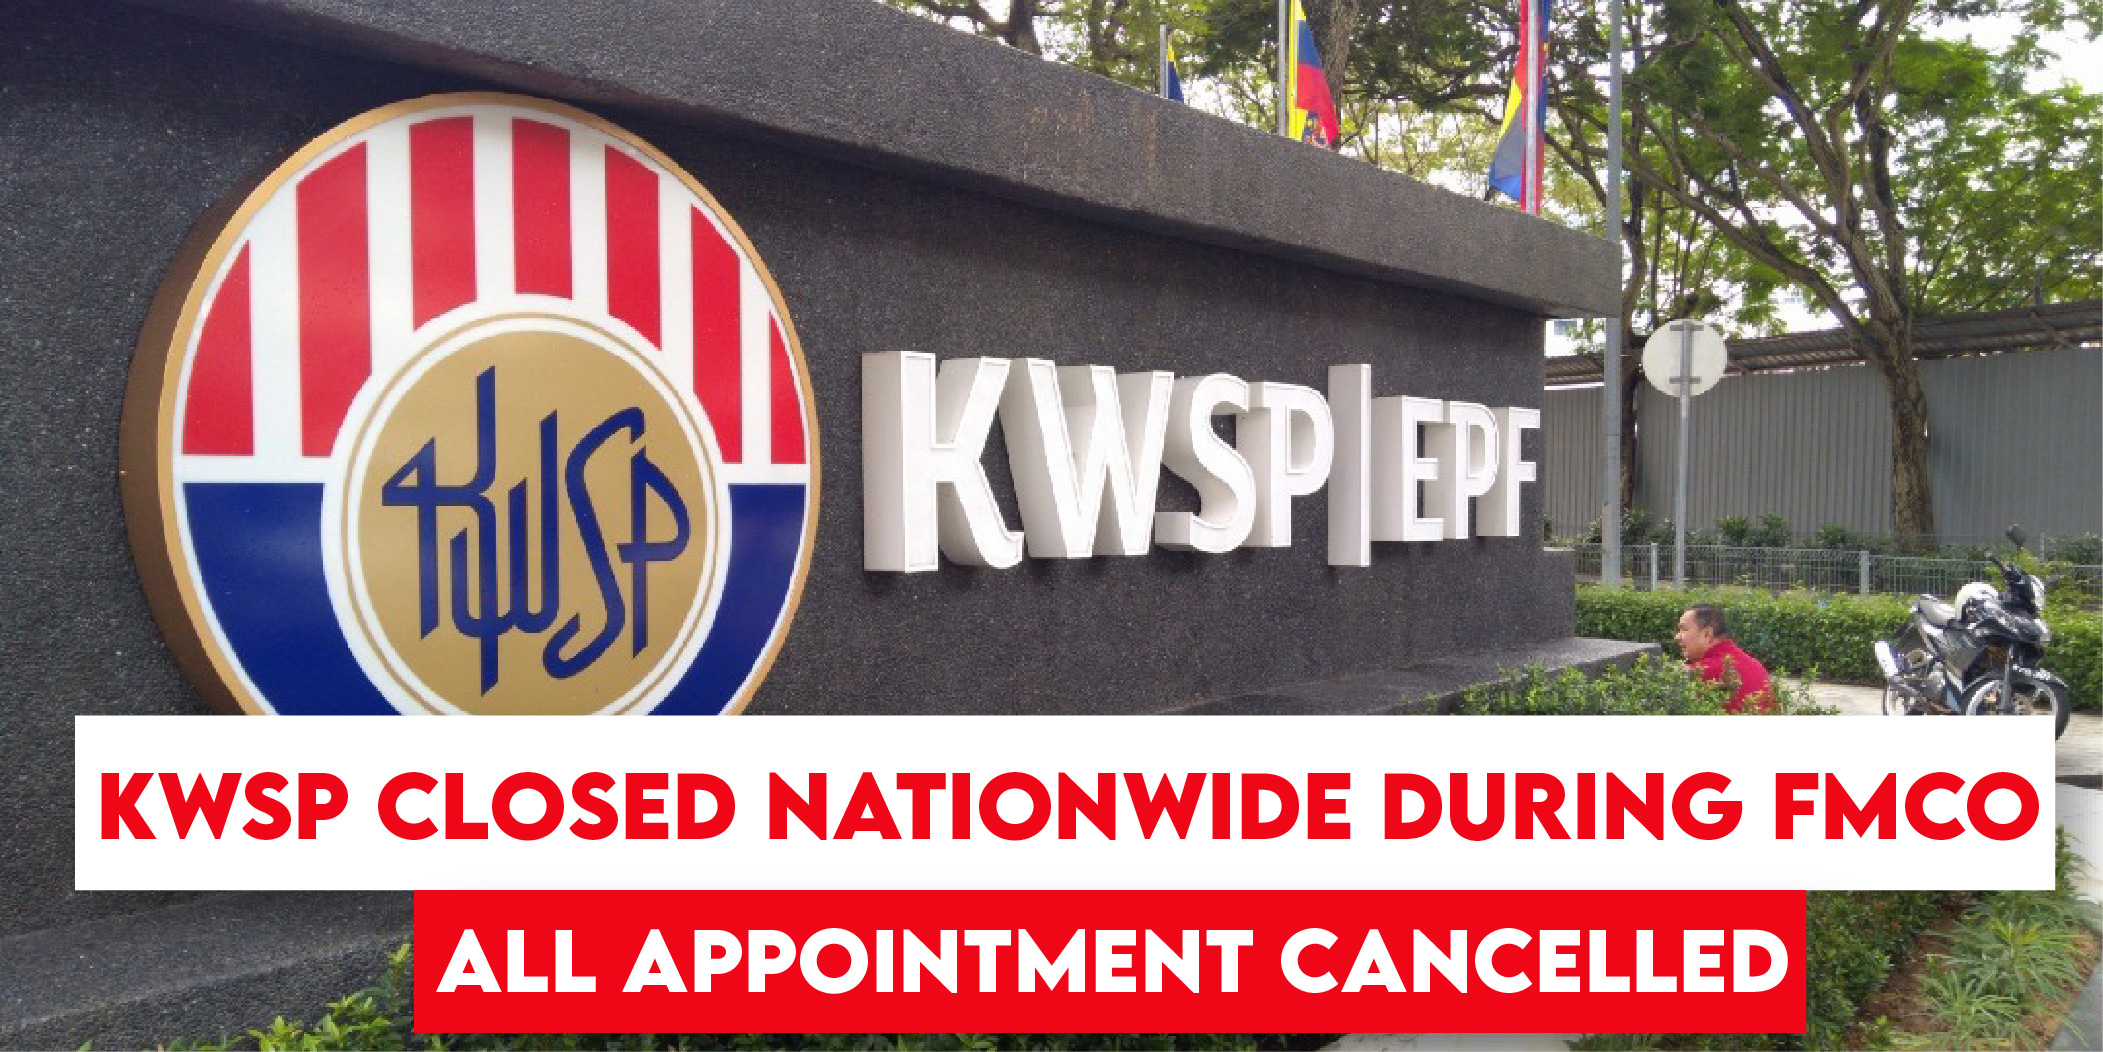 Kwsp appointment